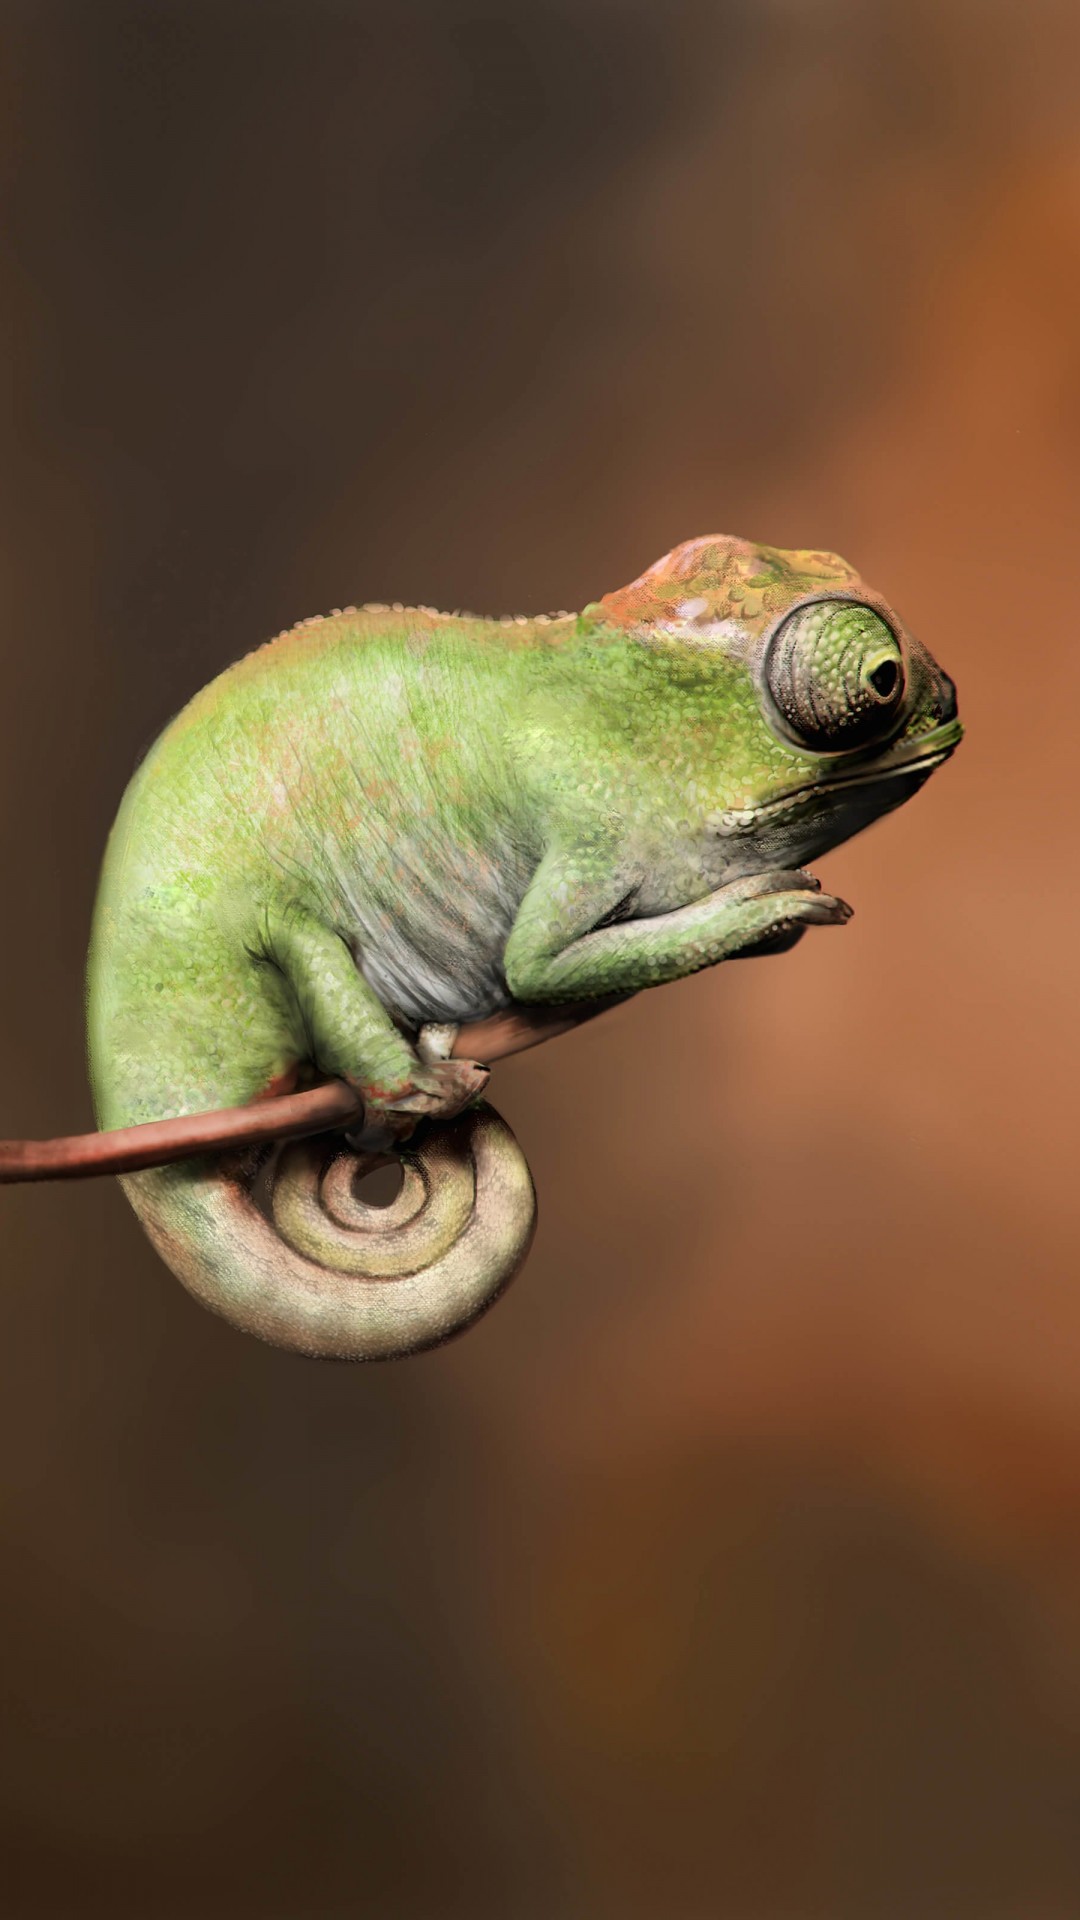 Baby Chameleon Perching On a Twisted Branch Wallpaper for HTC One